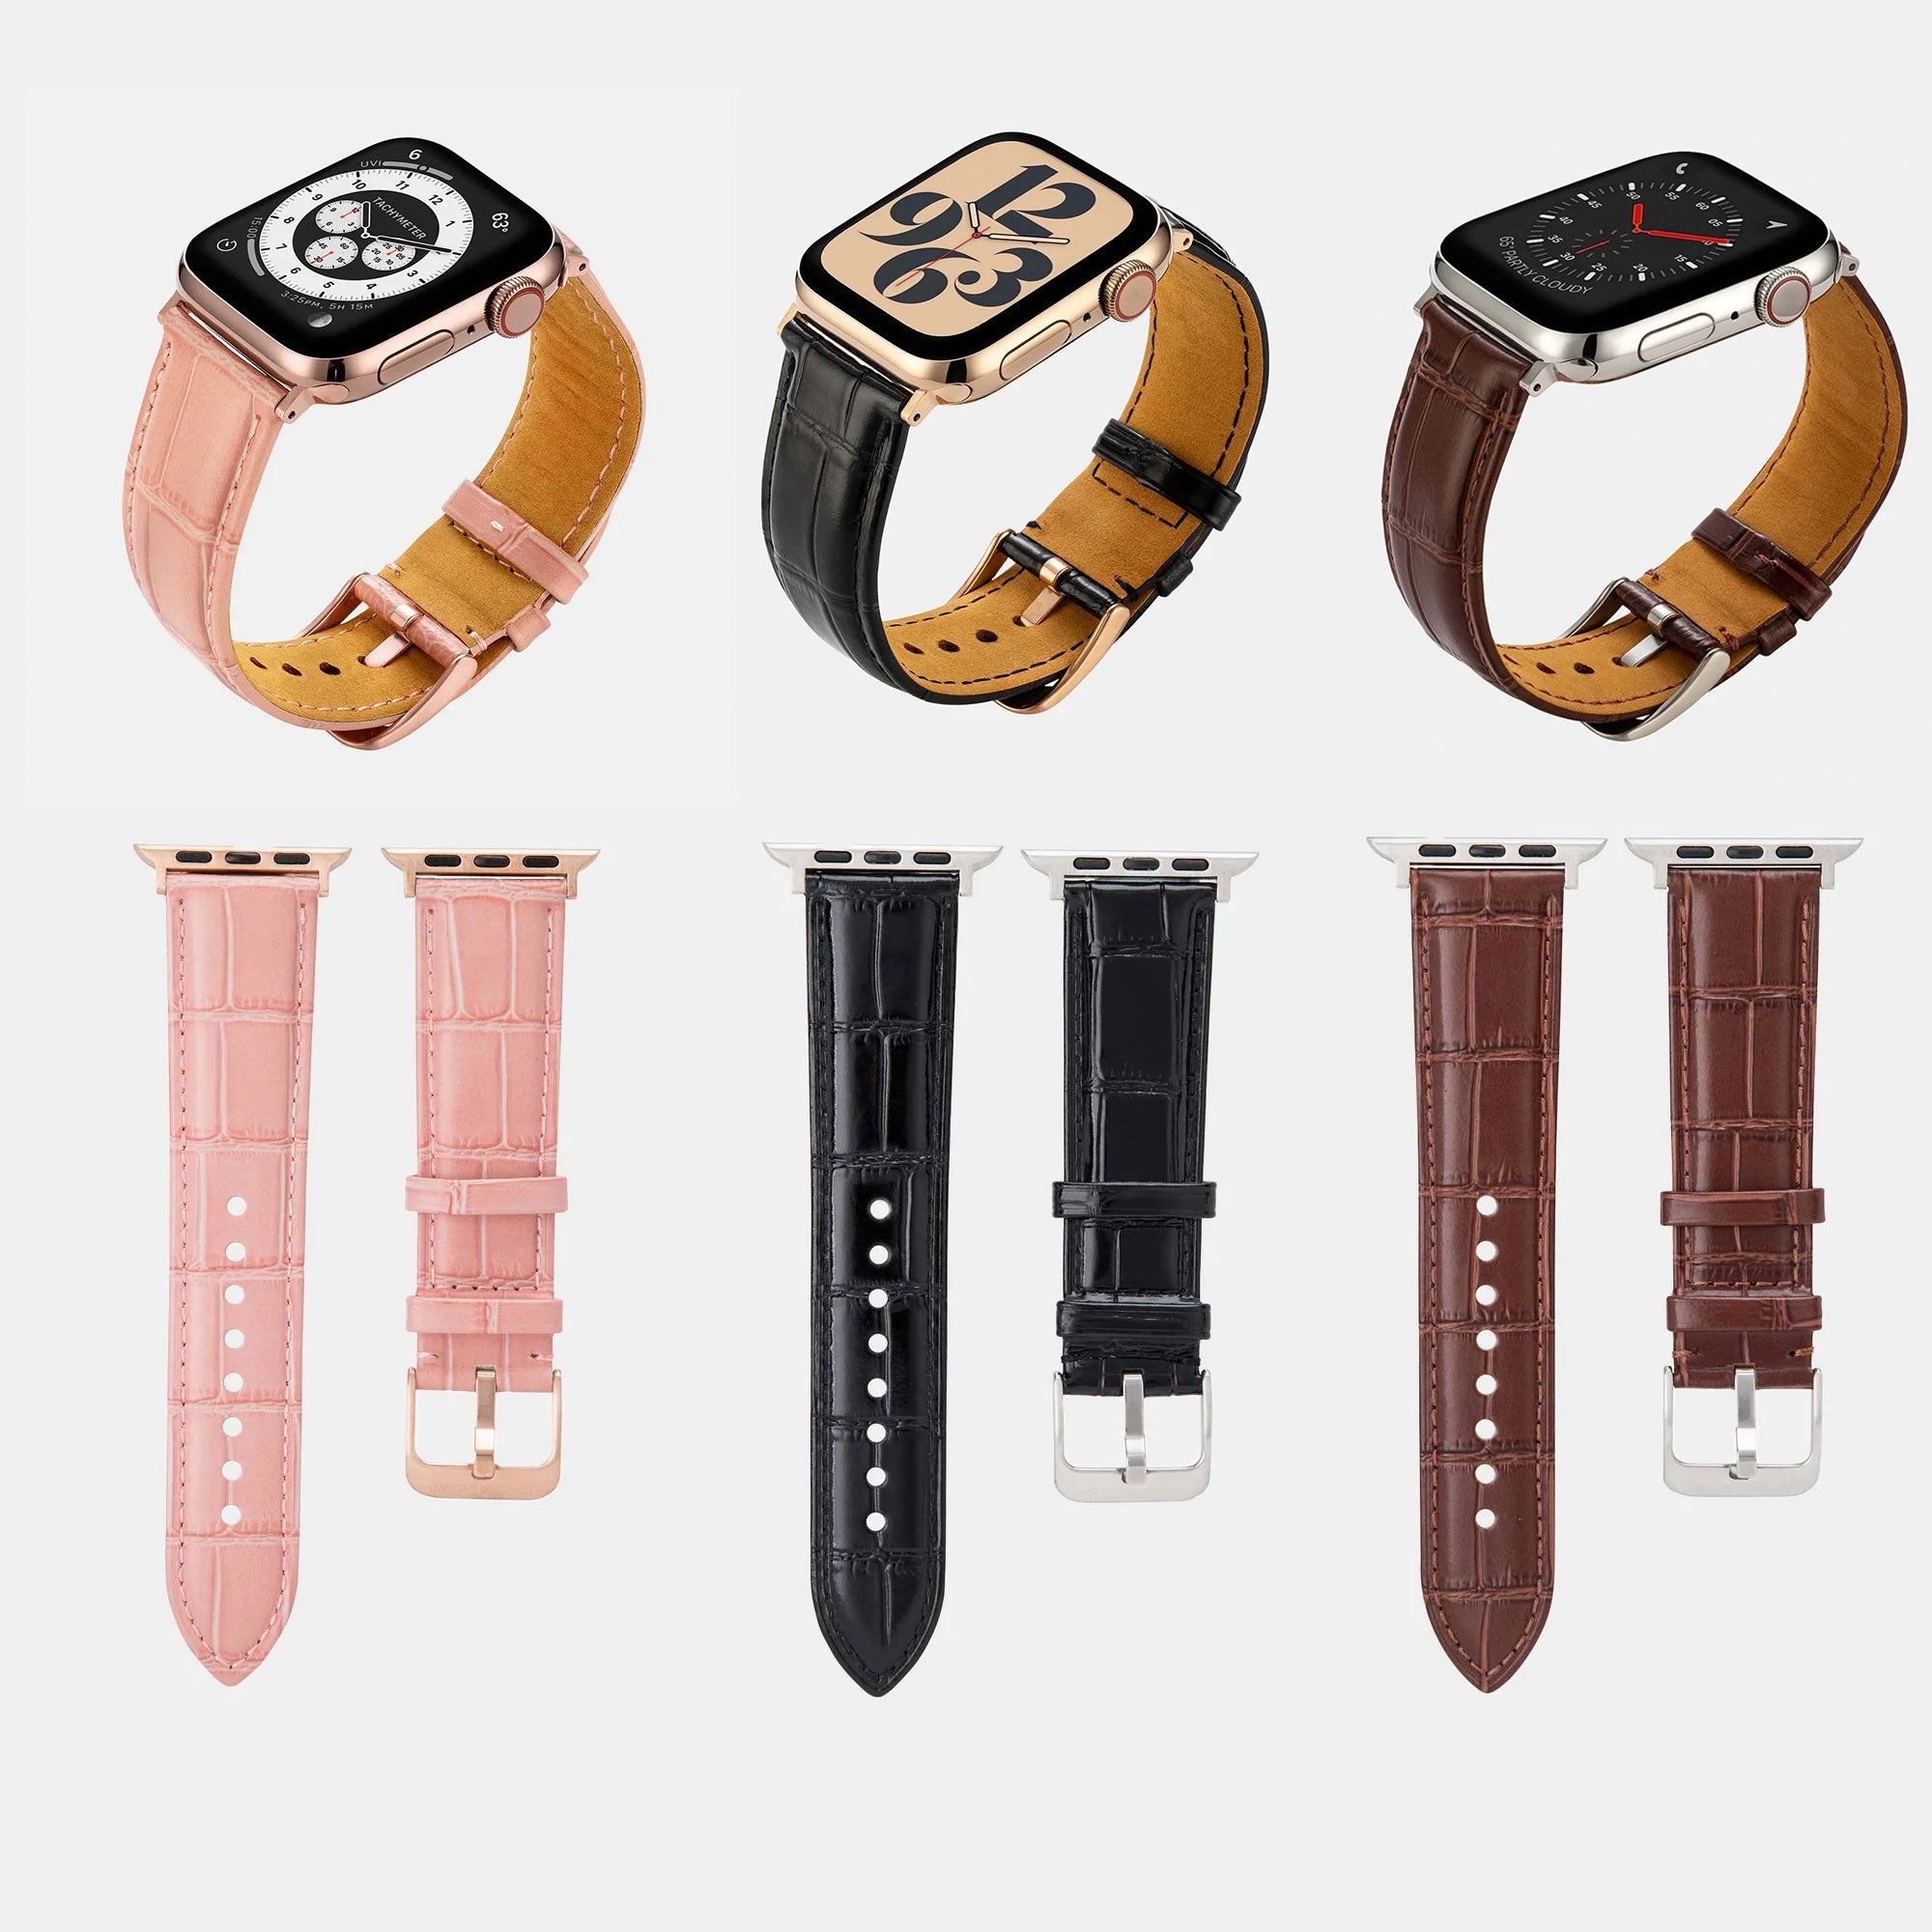 Pre-Loved Miam Apple Watch Straps Black, Brown or Pink - Buckle & Band - PL-MIA-38-BRN-GL